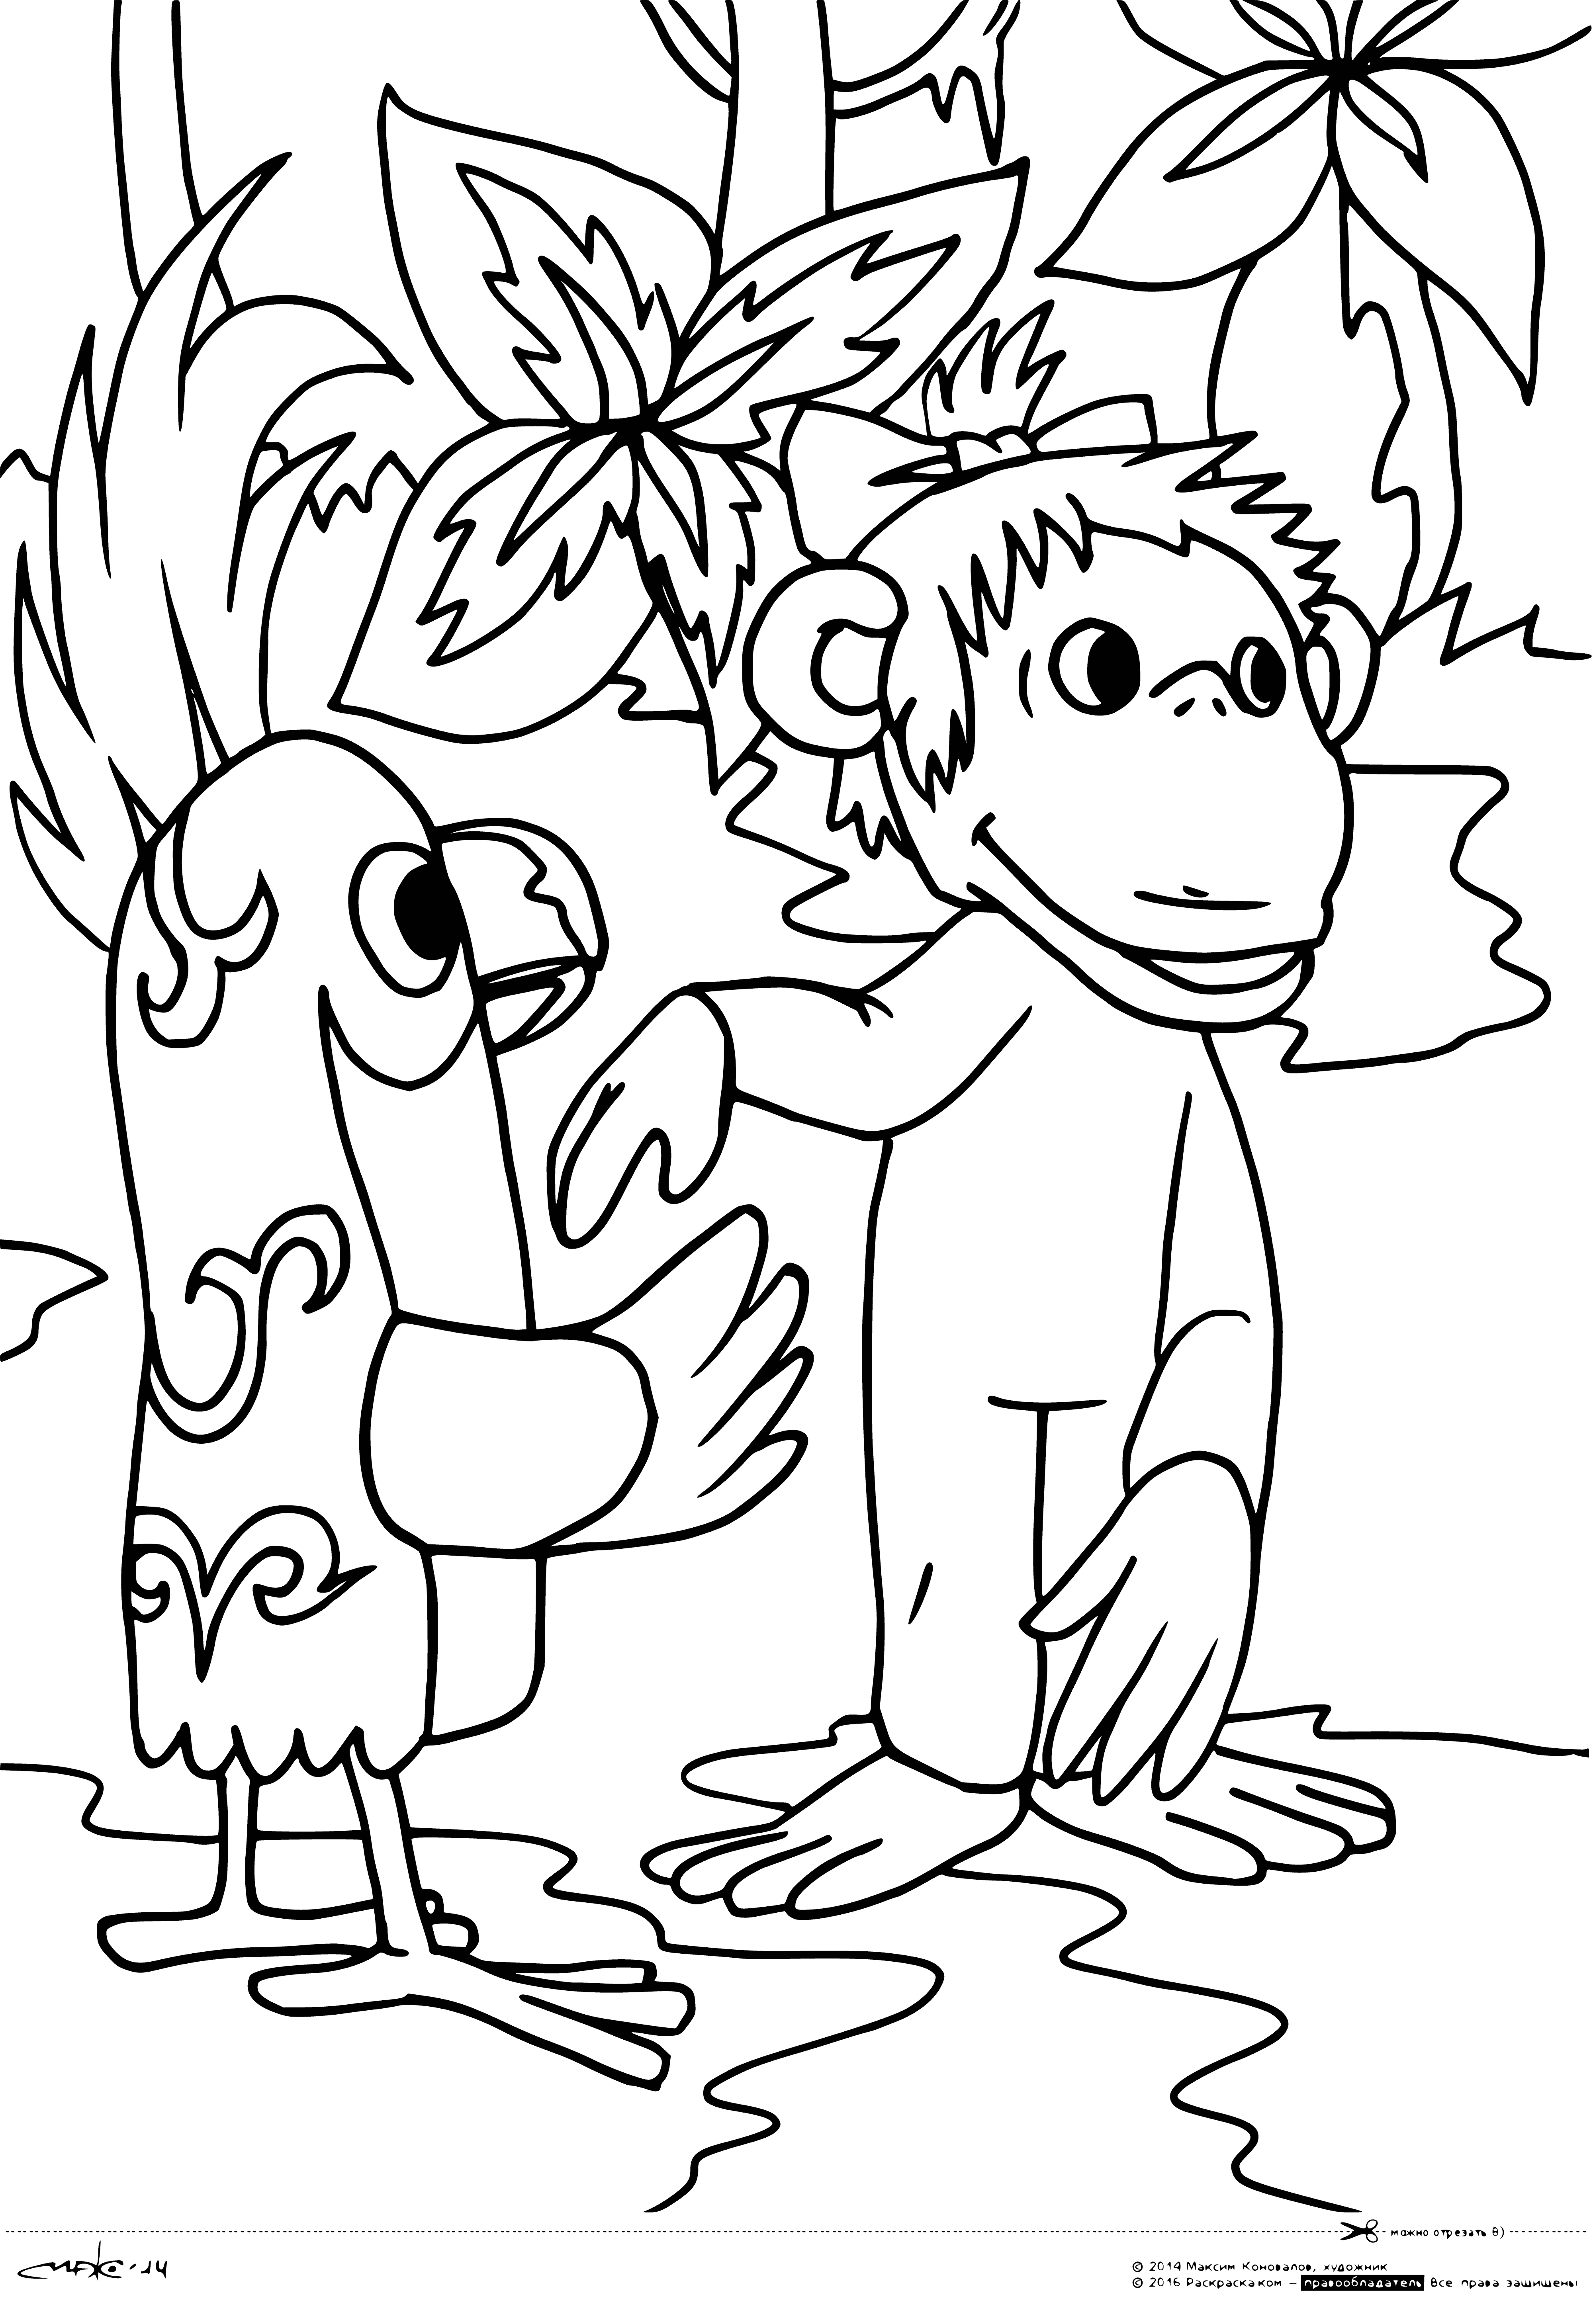 coloring page: Two monkeys & 38 parrots in a coloring page; some on monkeys' heads. All different colors.